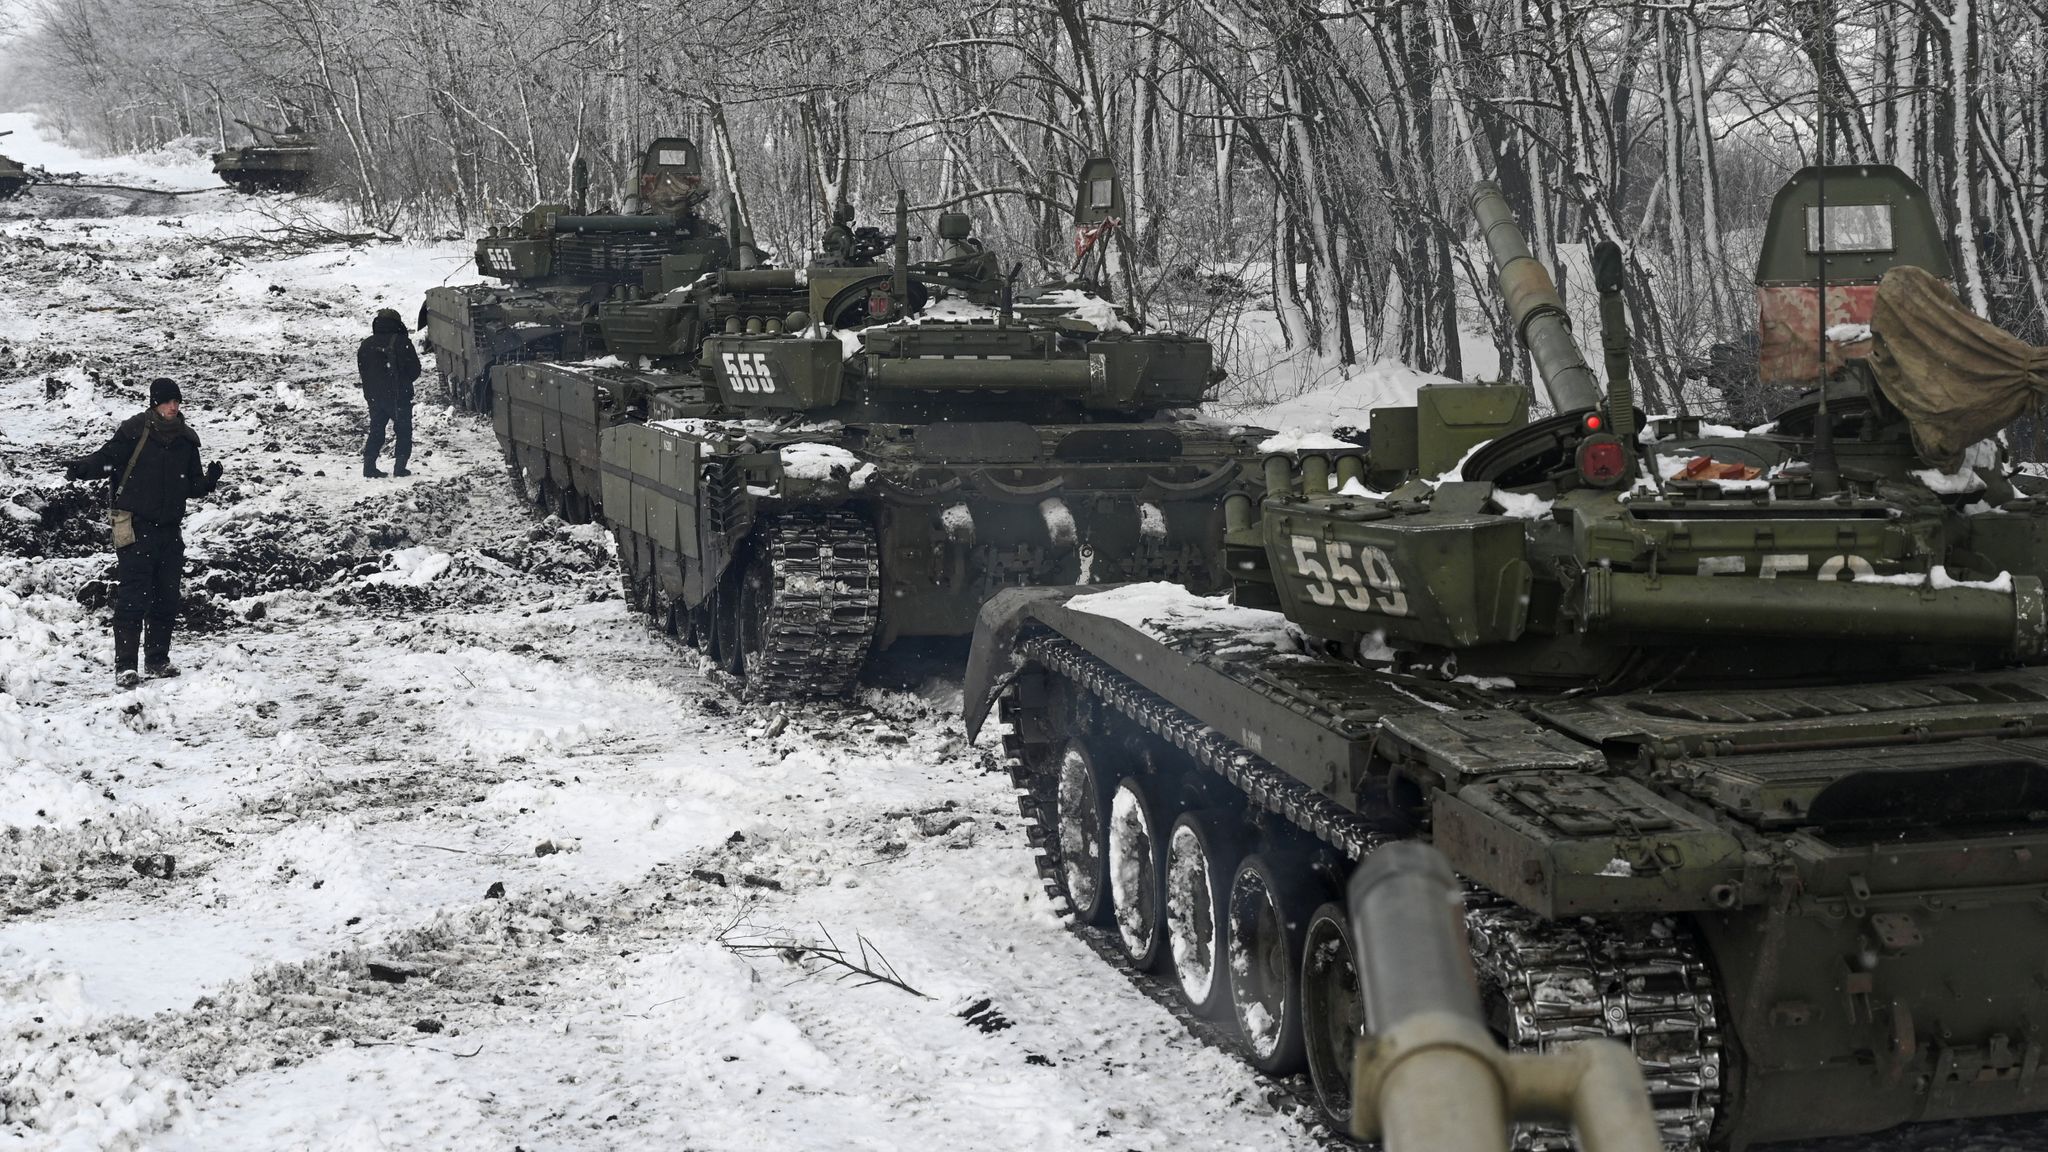 Ukraine mobilizes 100,000 troops amid conflict with Russia